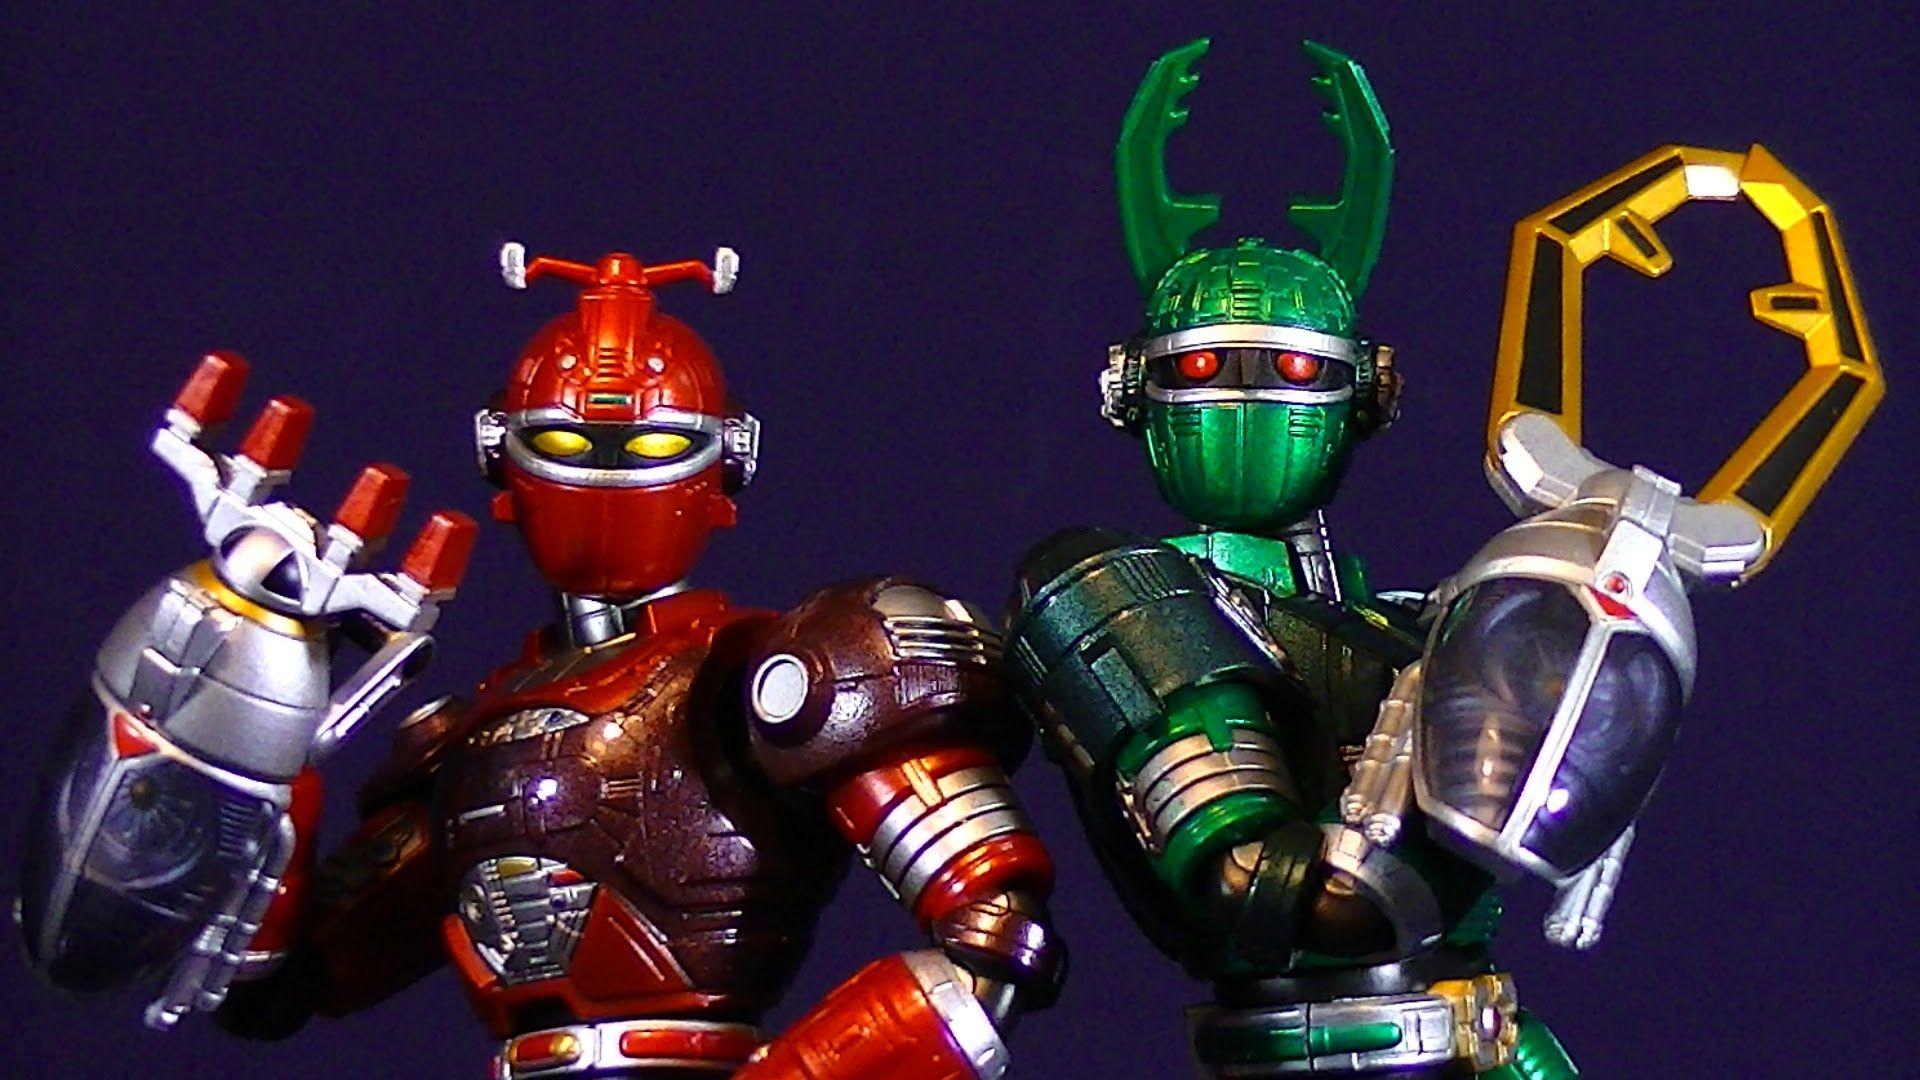 Power Rangers' 2017 Movie Suits Revealed: For 'More Mature